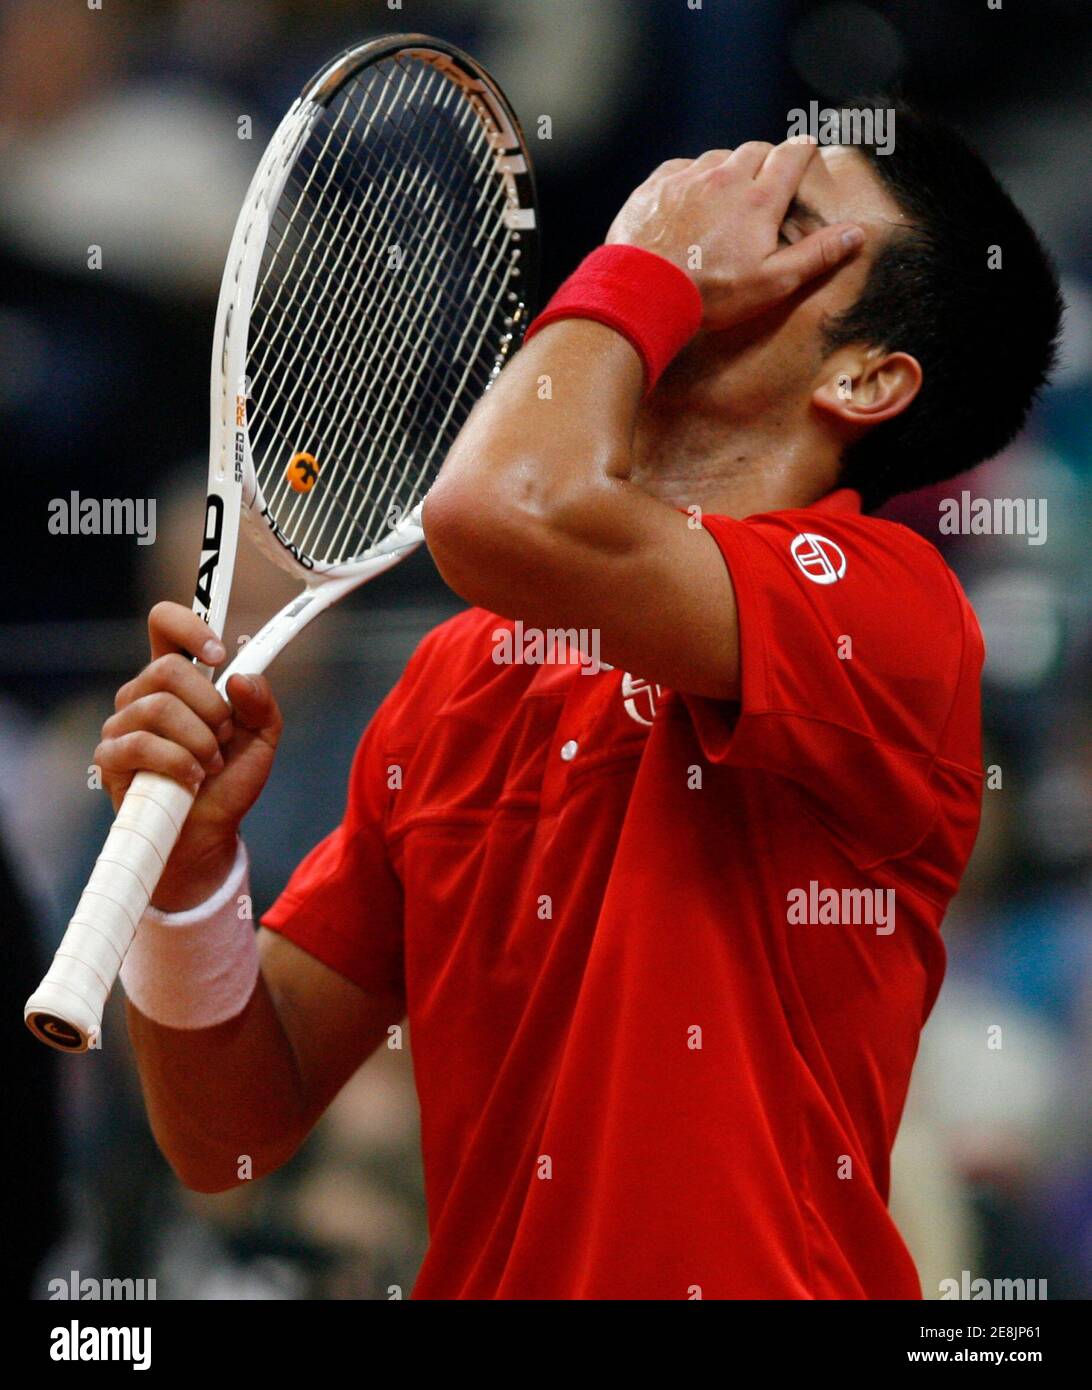 Serbia's Novak Djokovic reacts during his game against Sam Querrey of the U.S. during their Davis Cup World Group tennis match in Belgrade March 5, 2010.   REUTERS/Ivan Milutinovic (SERBIA - Tags: SPORT TENNIS) Stock Photo